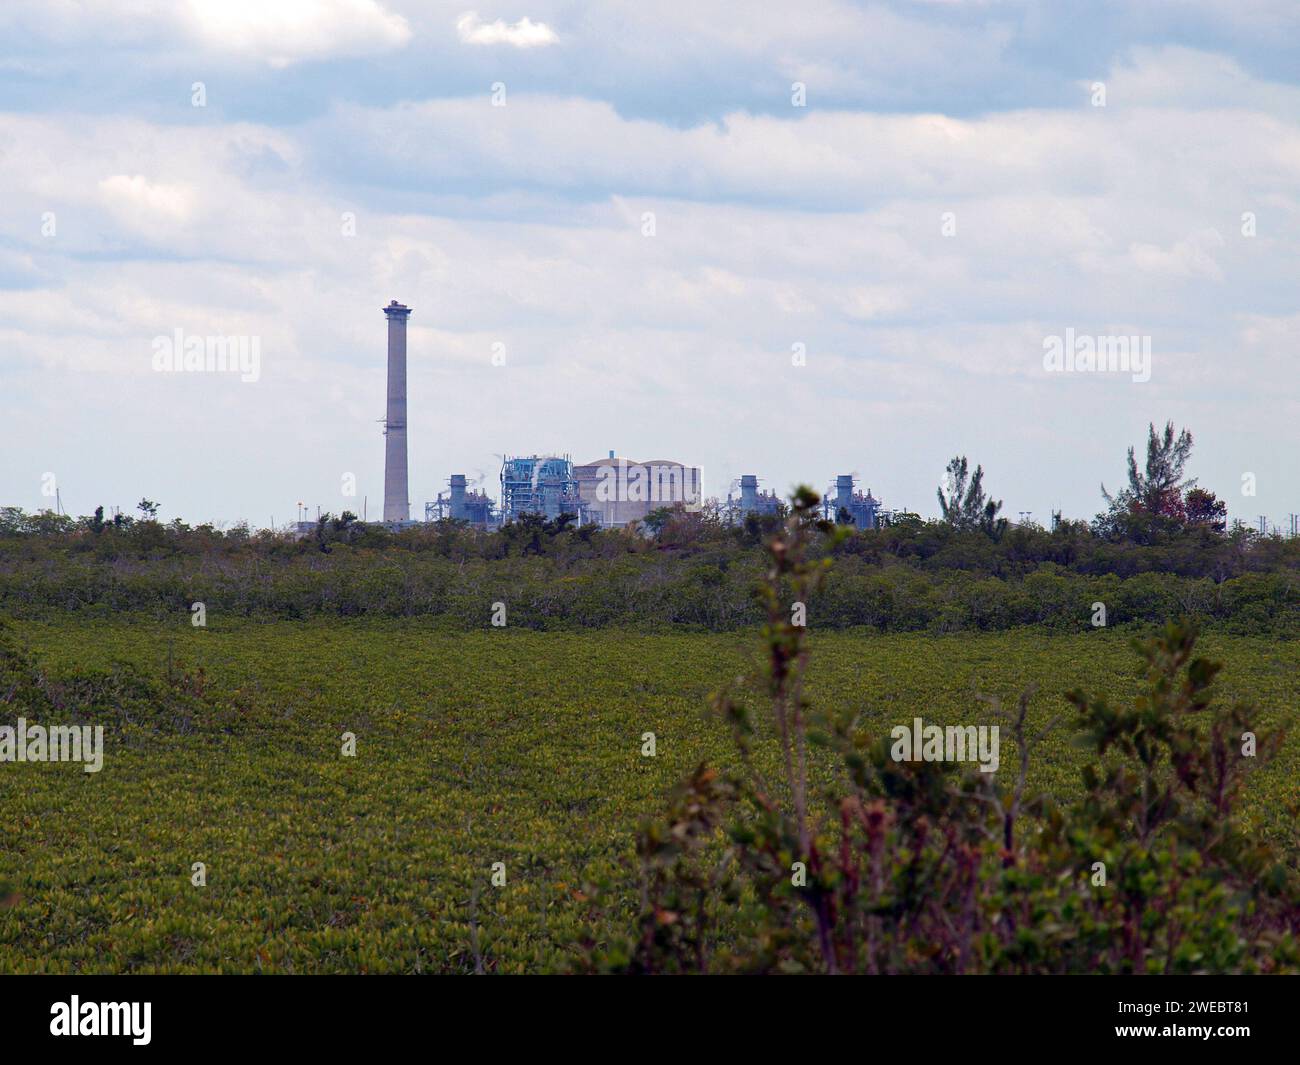 Homestead, Florida, United States - March 15, 2015: Turkey Point Nuclear Power Station in South Florida. This station is operated by FPL. Stock Photo